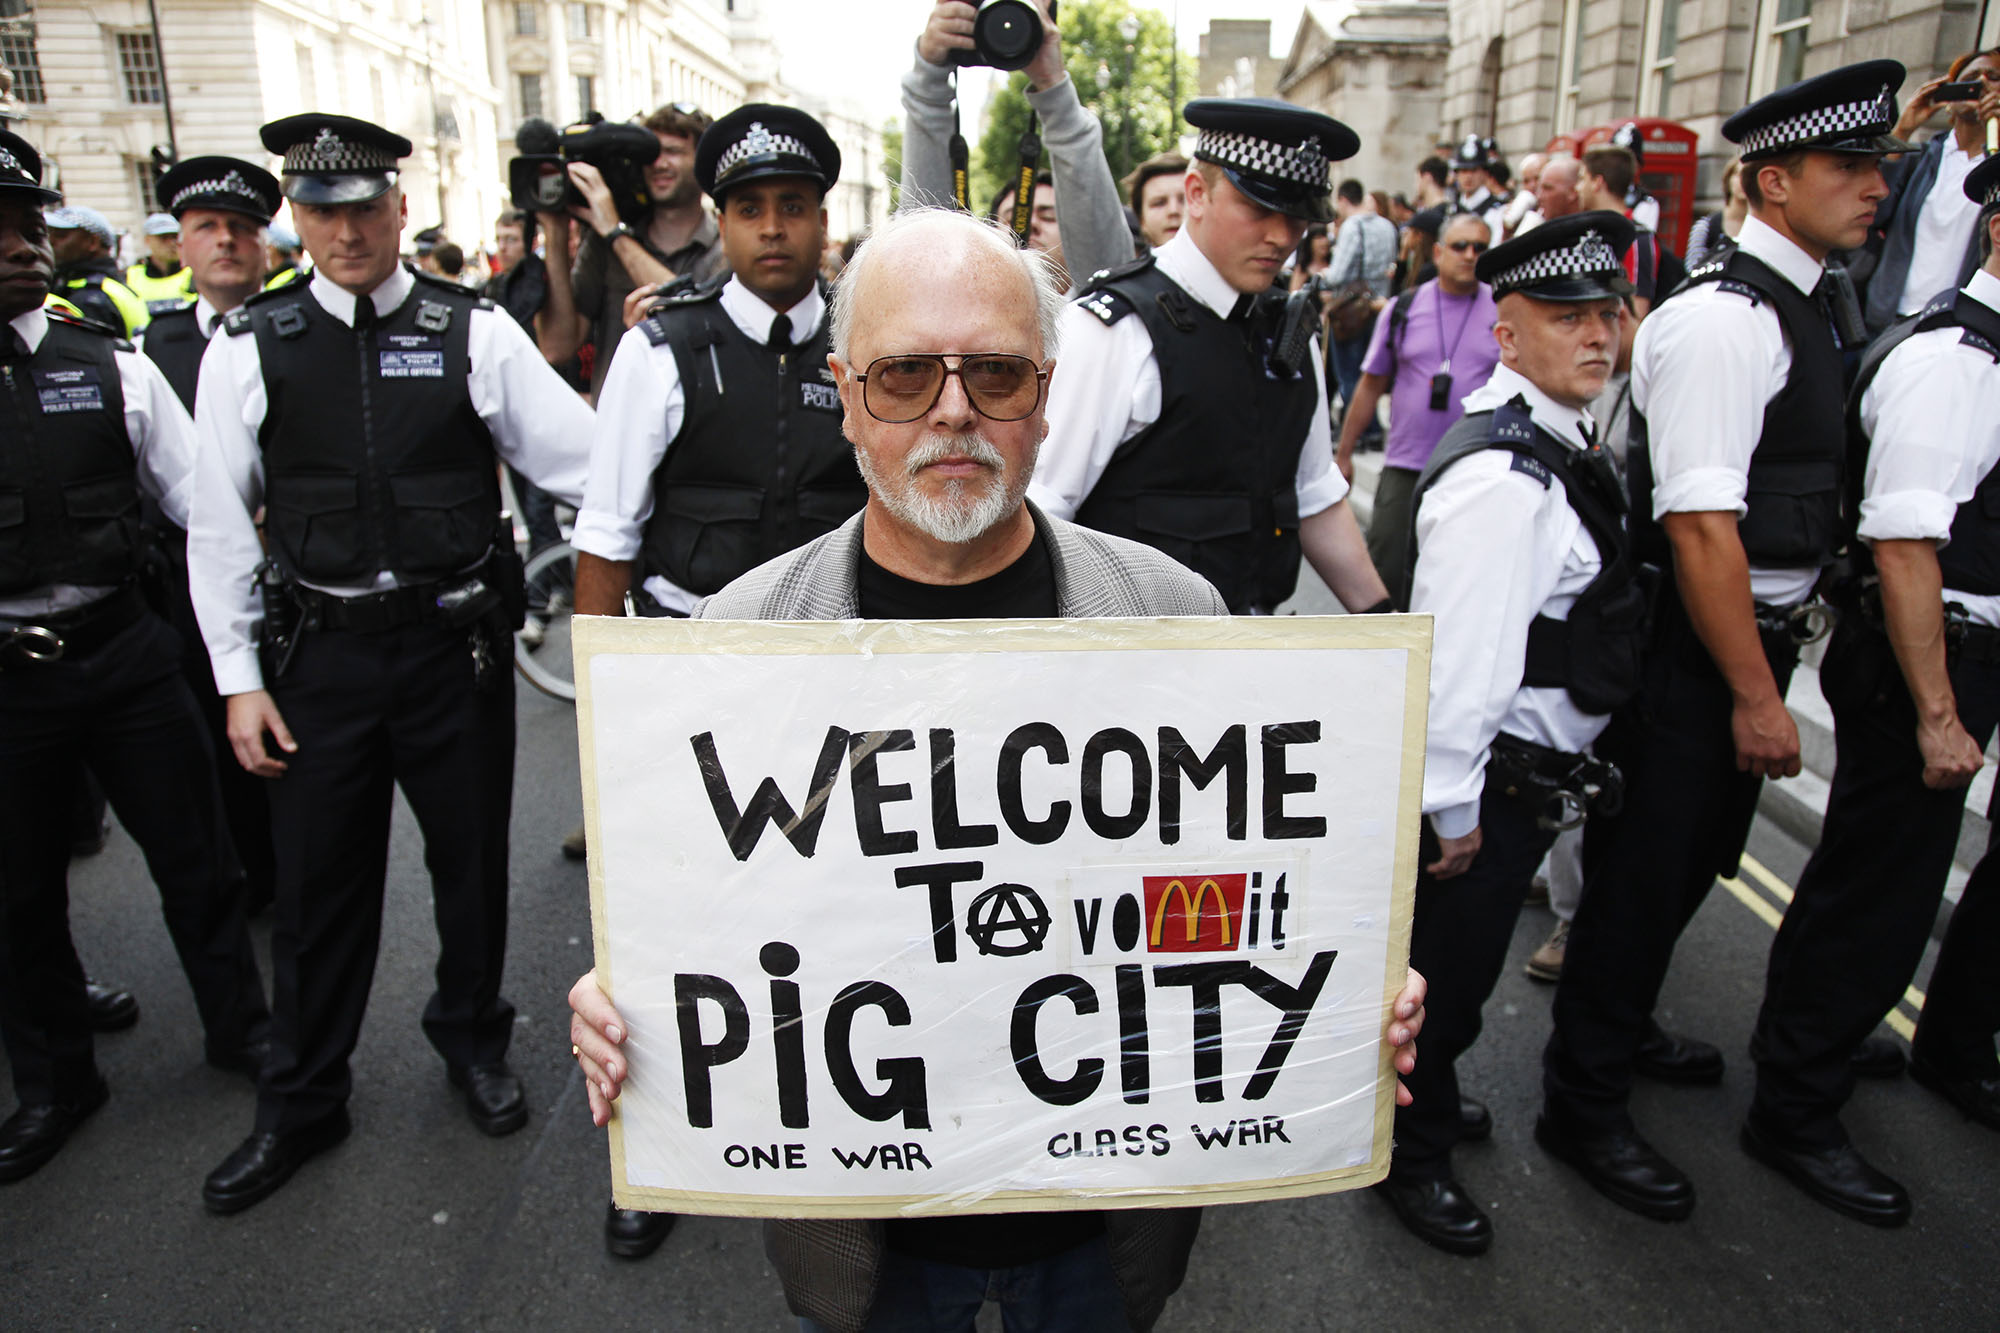  Welcome to Pig City, a regular on the demo circuit. 